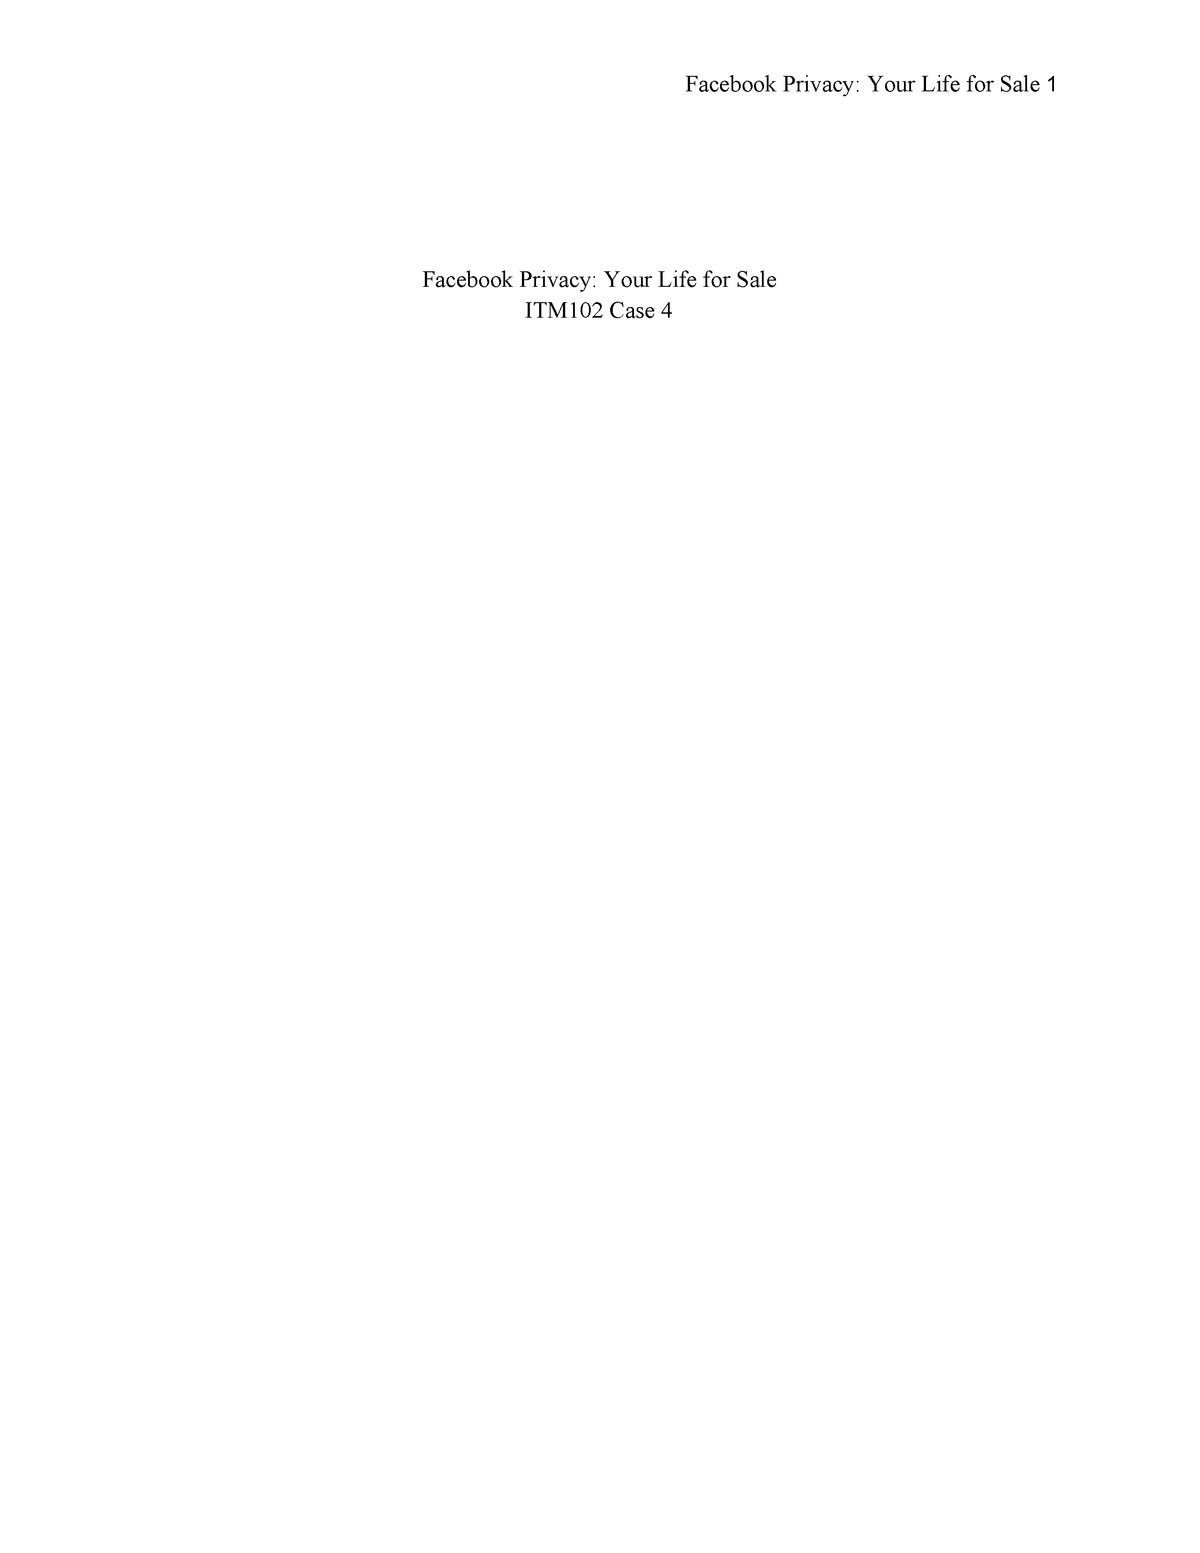 ITM Case4 pdf - case study 4 - Facebook Privacy: Your Life for Sale ...